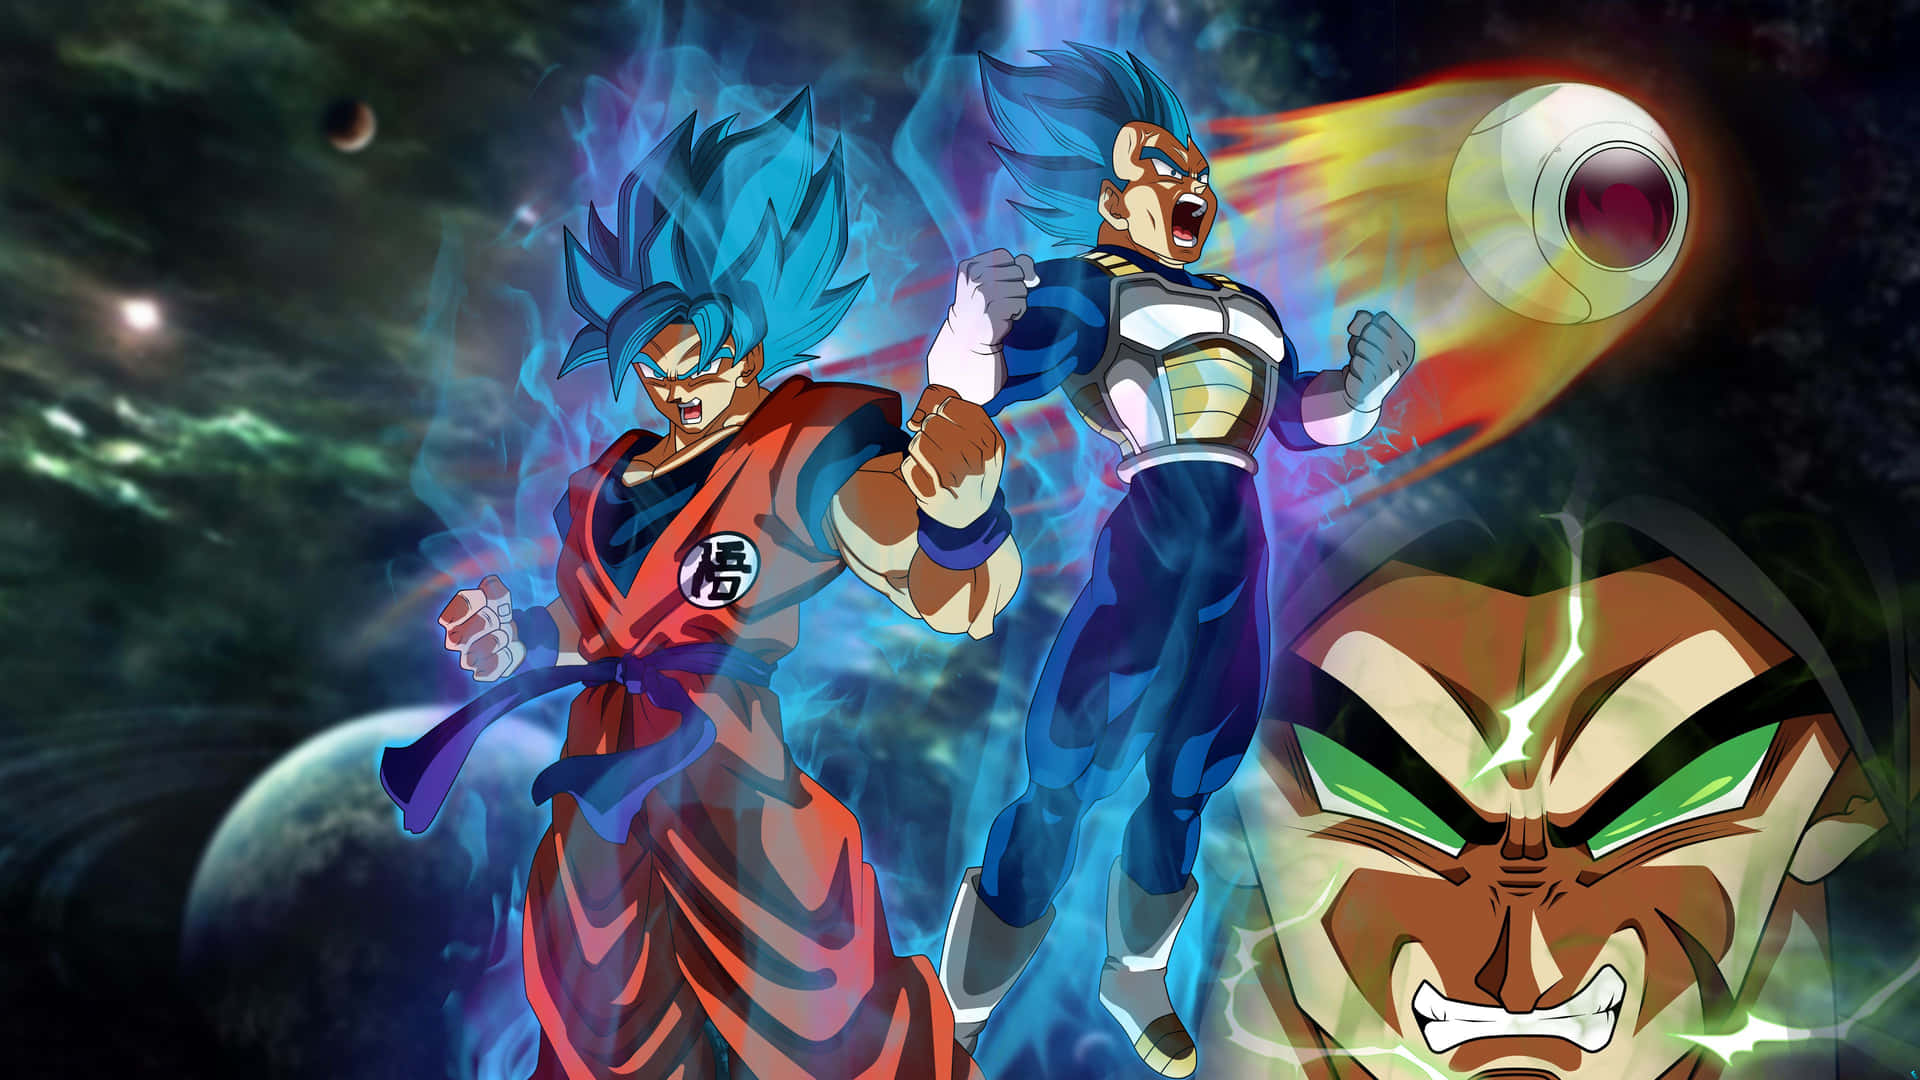 Enjoy the thrilling action of Dragon Ball Z in glorious 4K resolution! Wallpaper